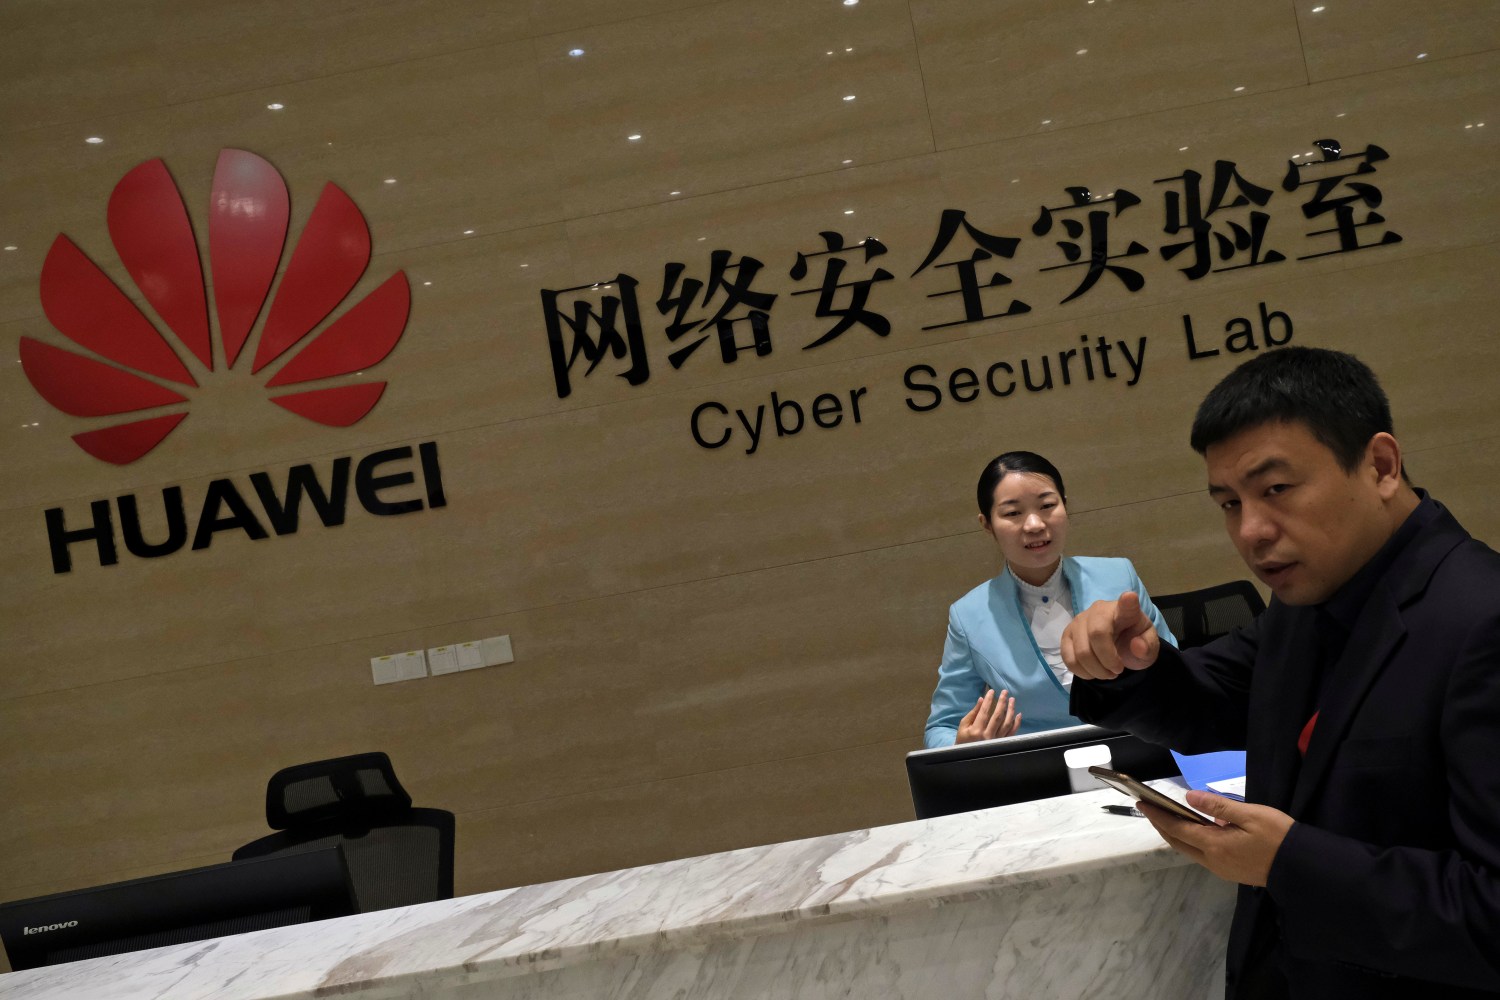 A reception area of the Huawei's Cyber Security Lab is seen at its factory campus in Dongguan, Guangdong province, China March 25, 2019. Picture taken March 25, 2019. REUTERS/Tyrone Siu - RC19EB24D6A0